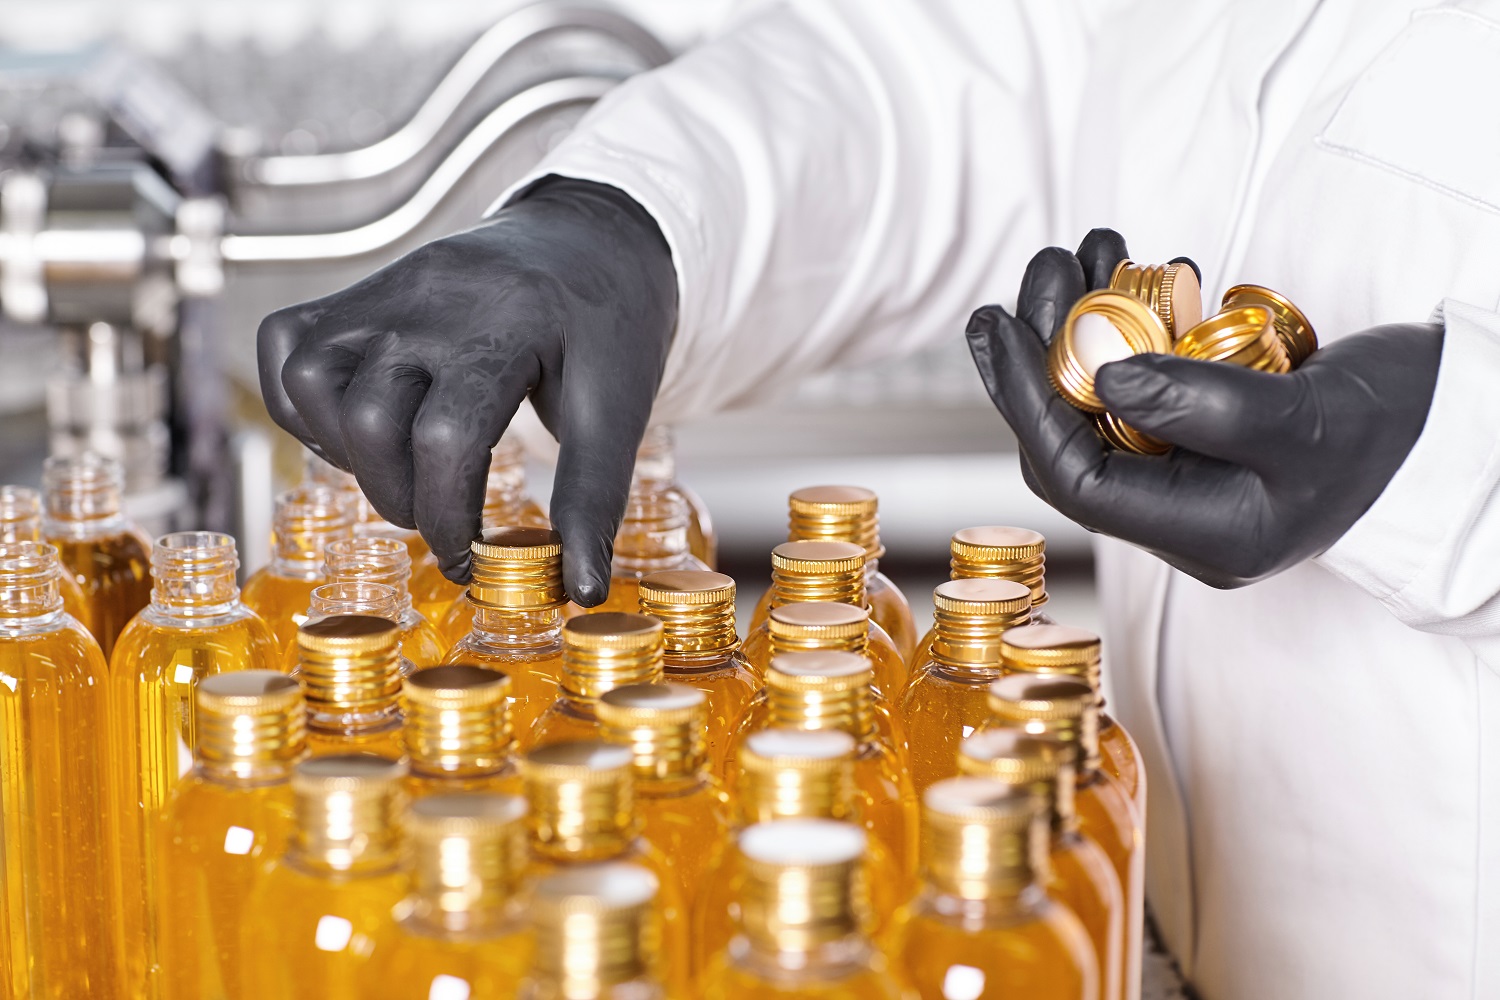 Laboratory worker wearing white medical gown and black rubber gloves holding robs in one hand and twisting glass bottles with yellow thick liquid. Medical professional worker creating new products